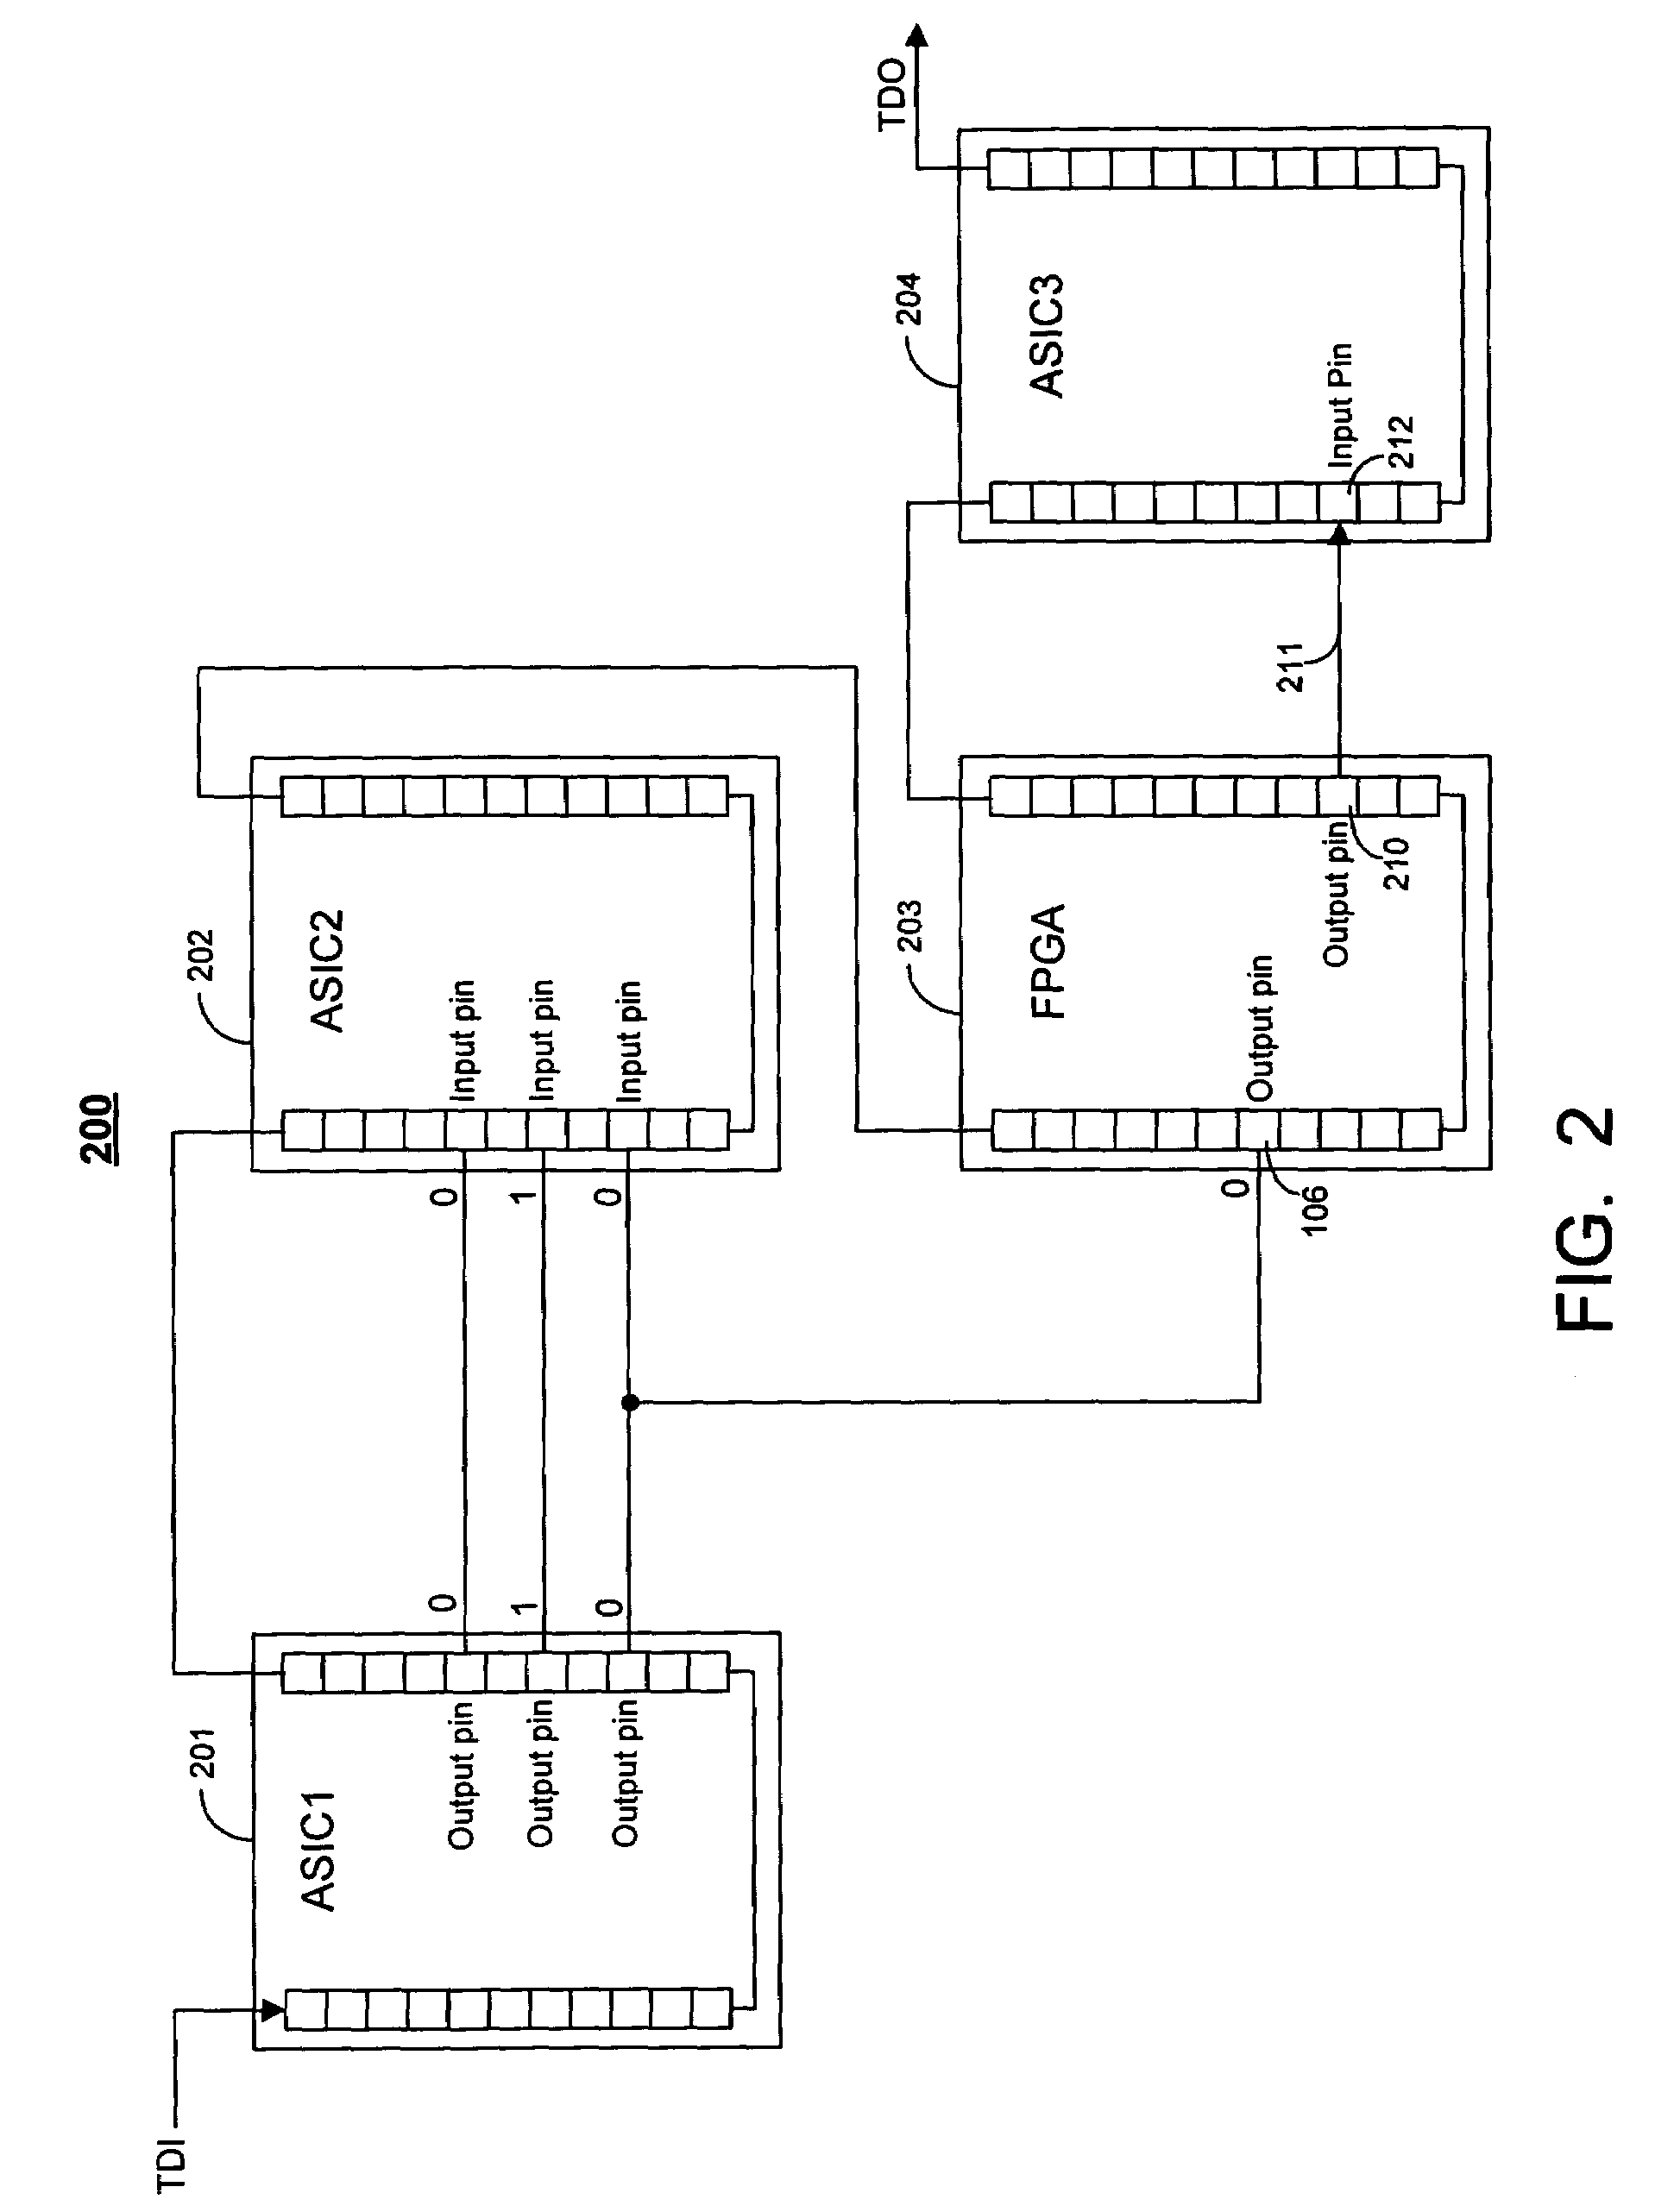 Techniques for capturing signals at output pins in a programmable logic integrated circuit